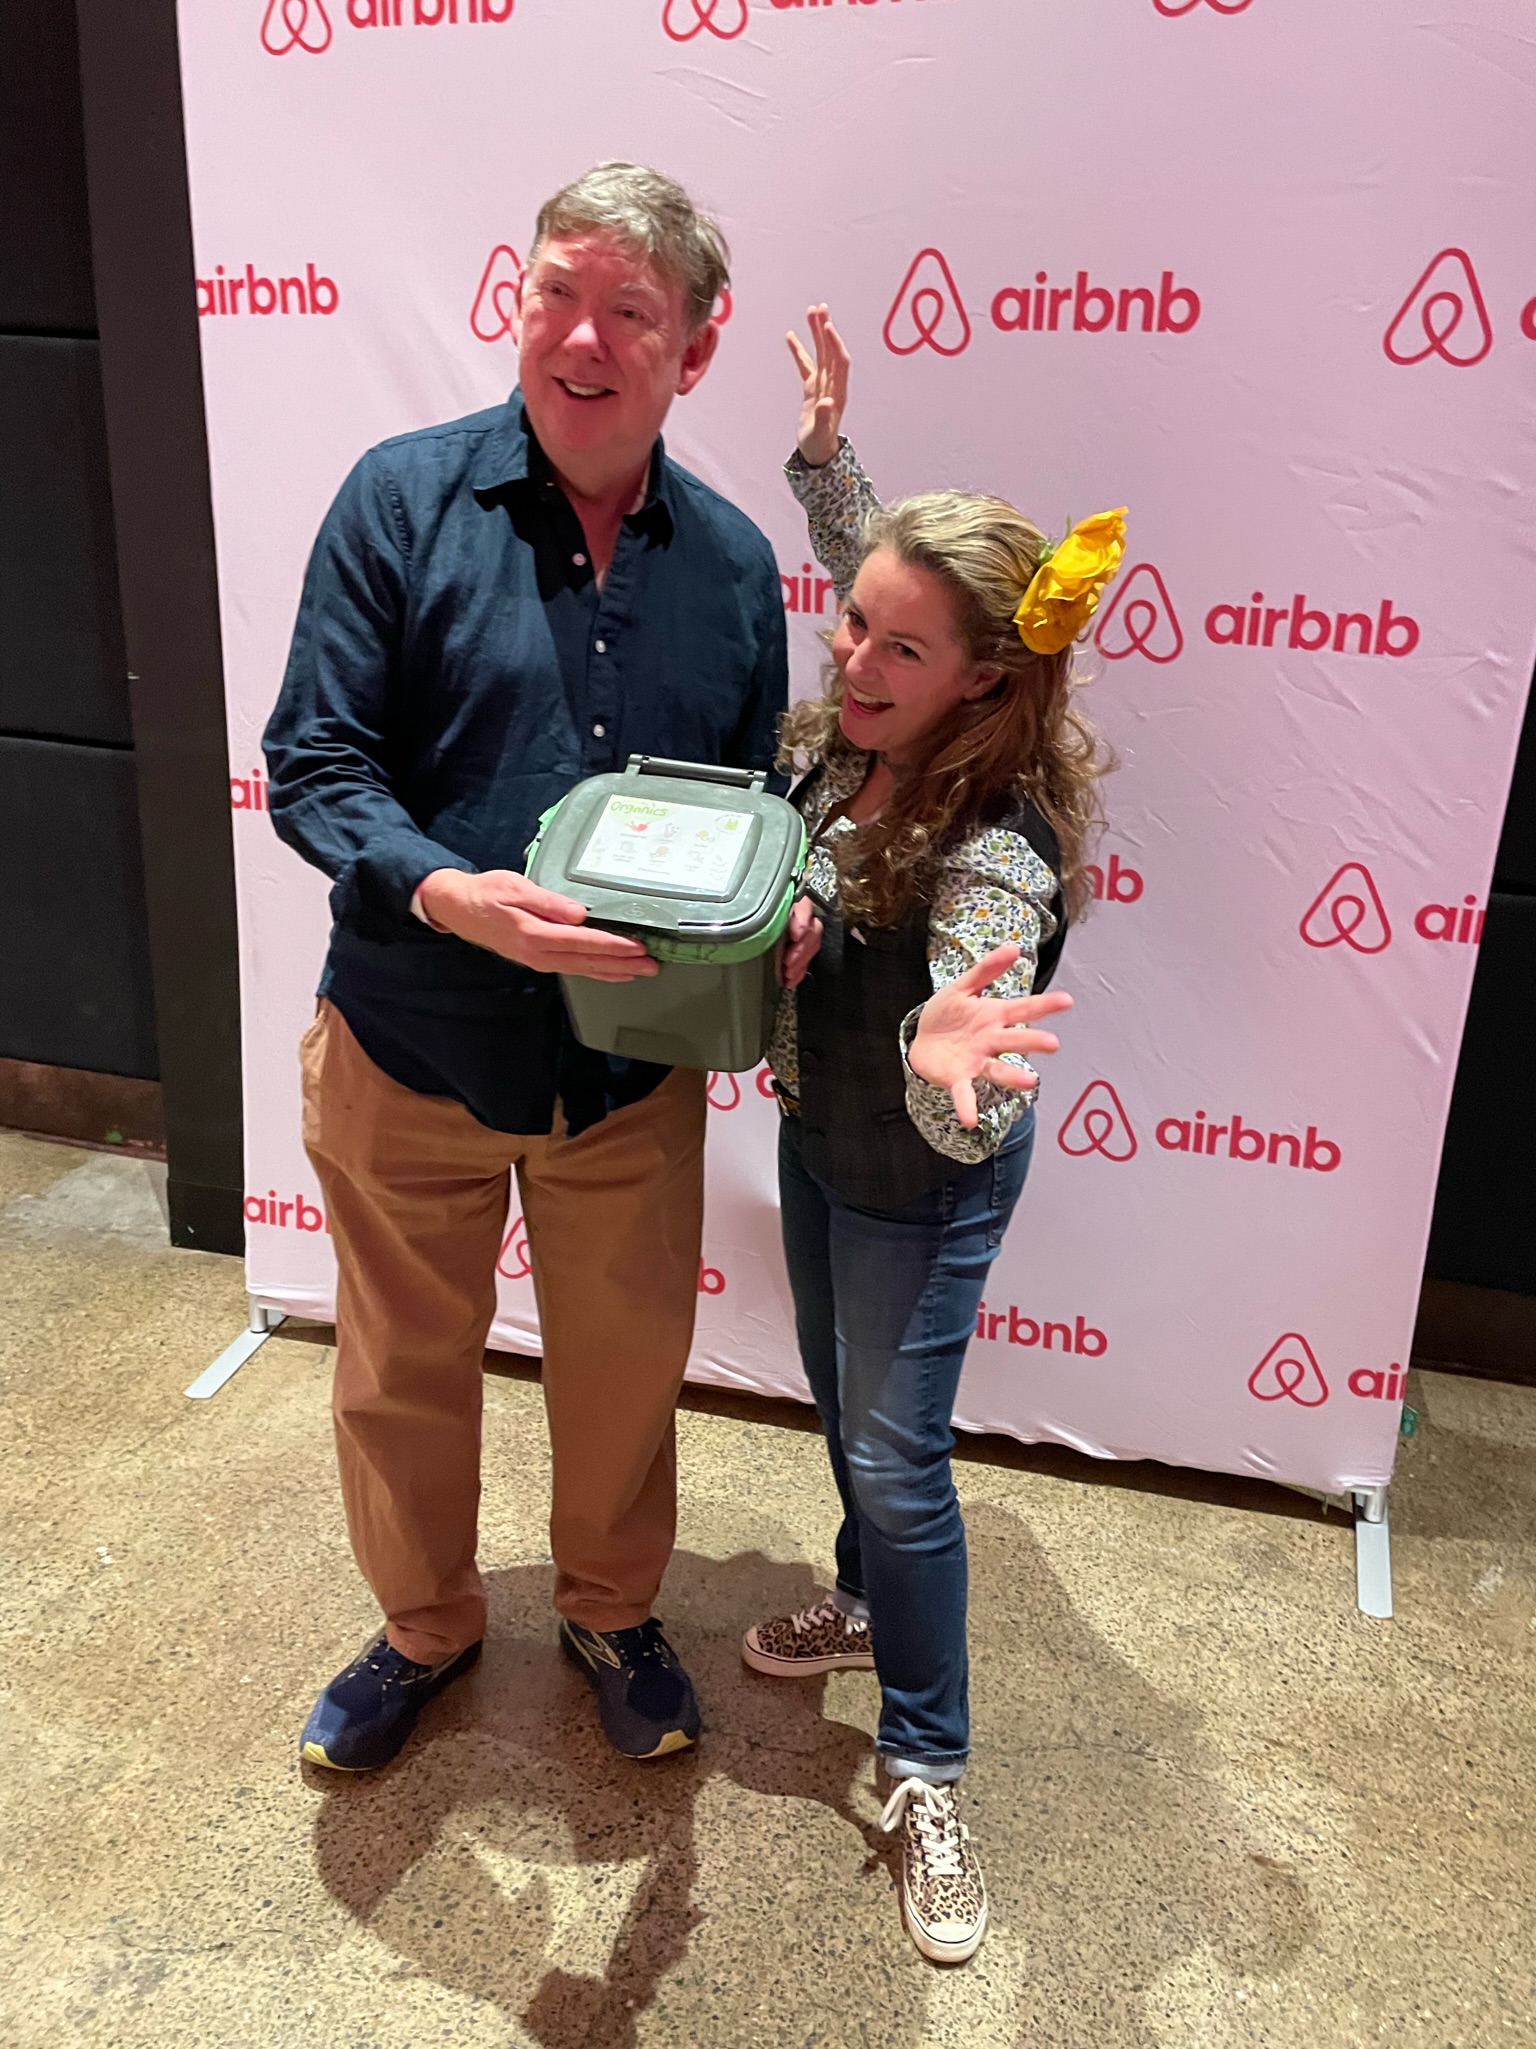 Airbnb superstar advisors and hosts